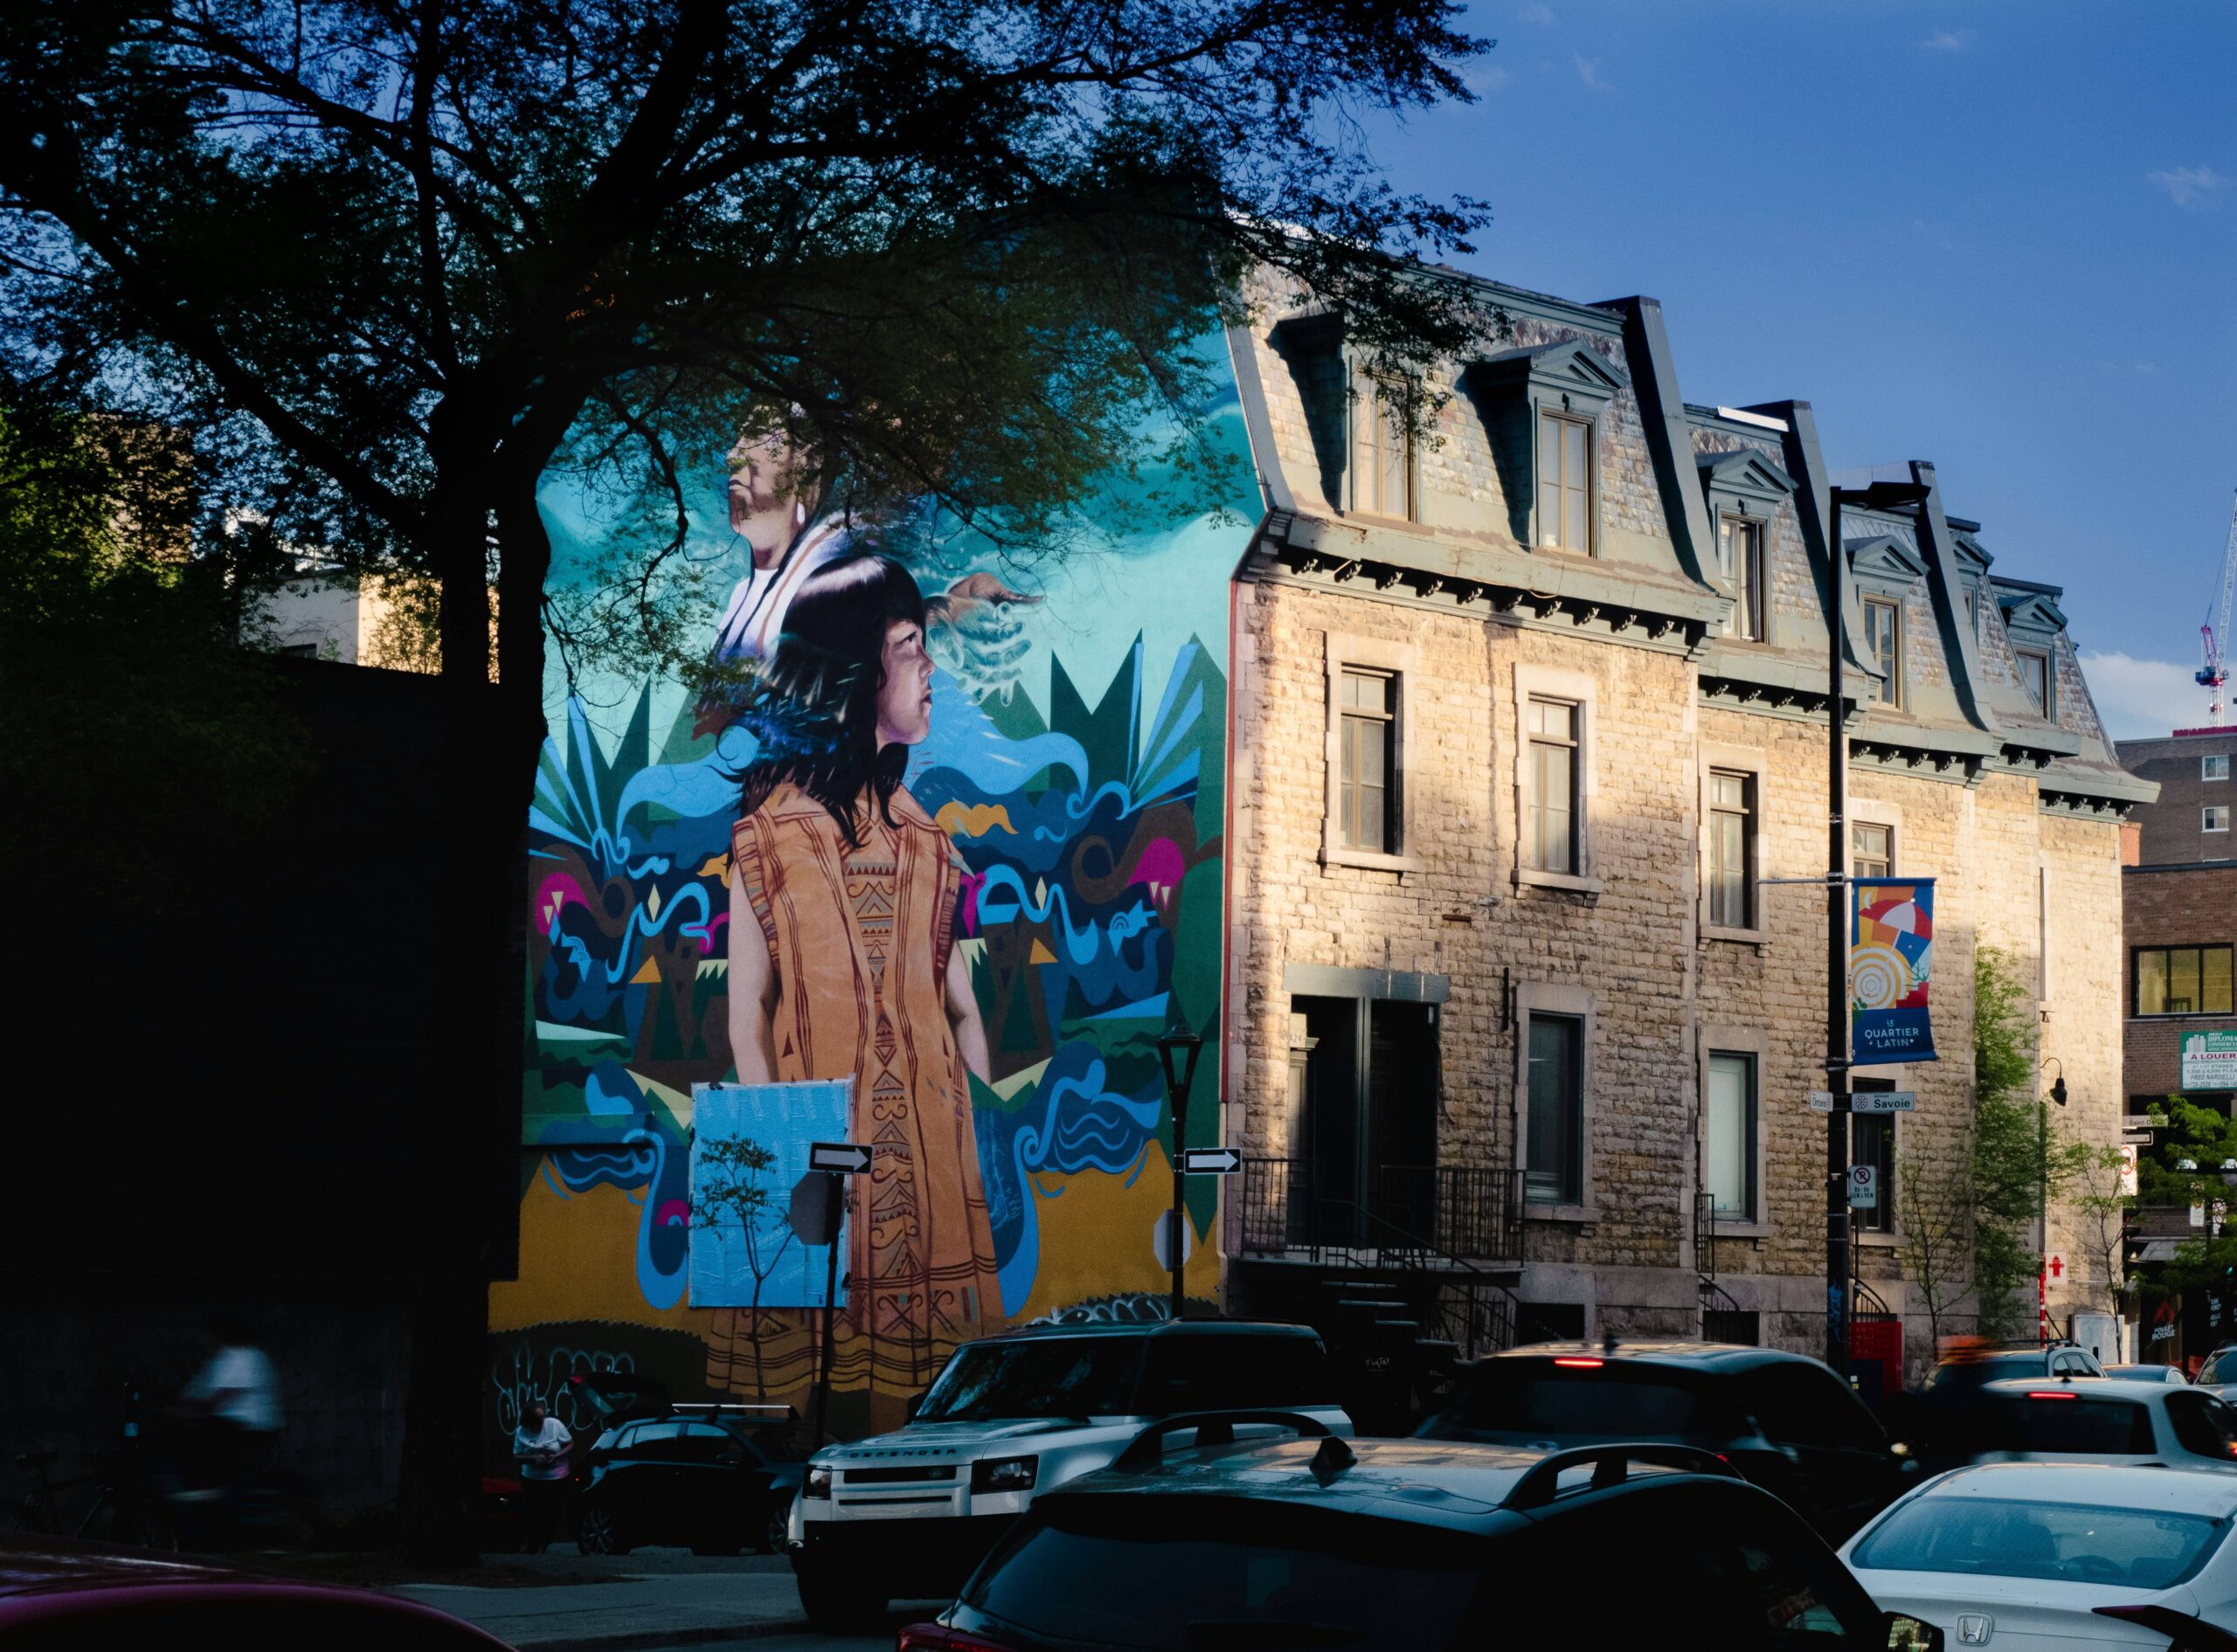 Mural of an Indigenous girl and an older Indigenous woman on the side of a building in Montreal.